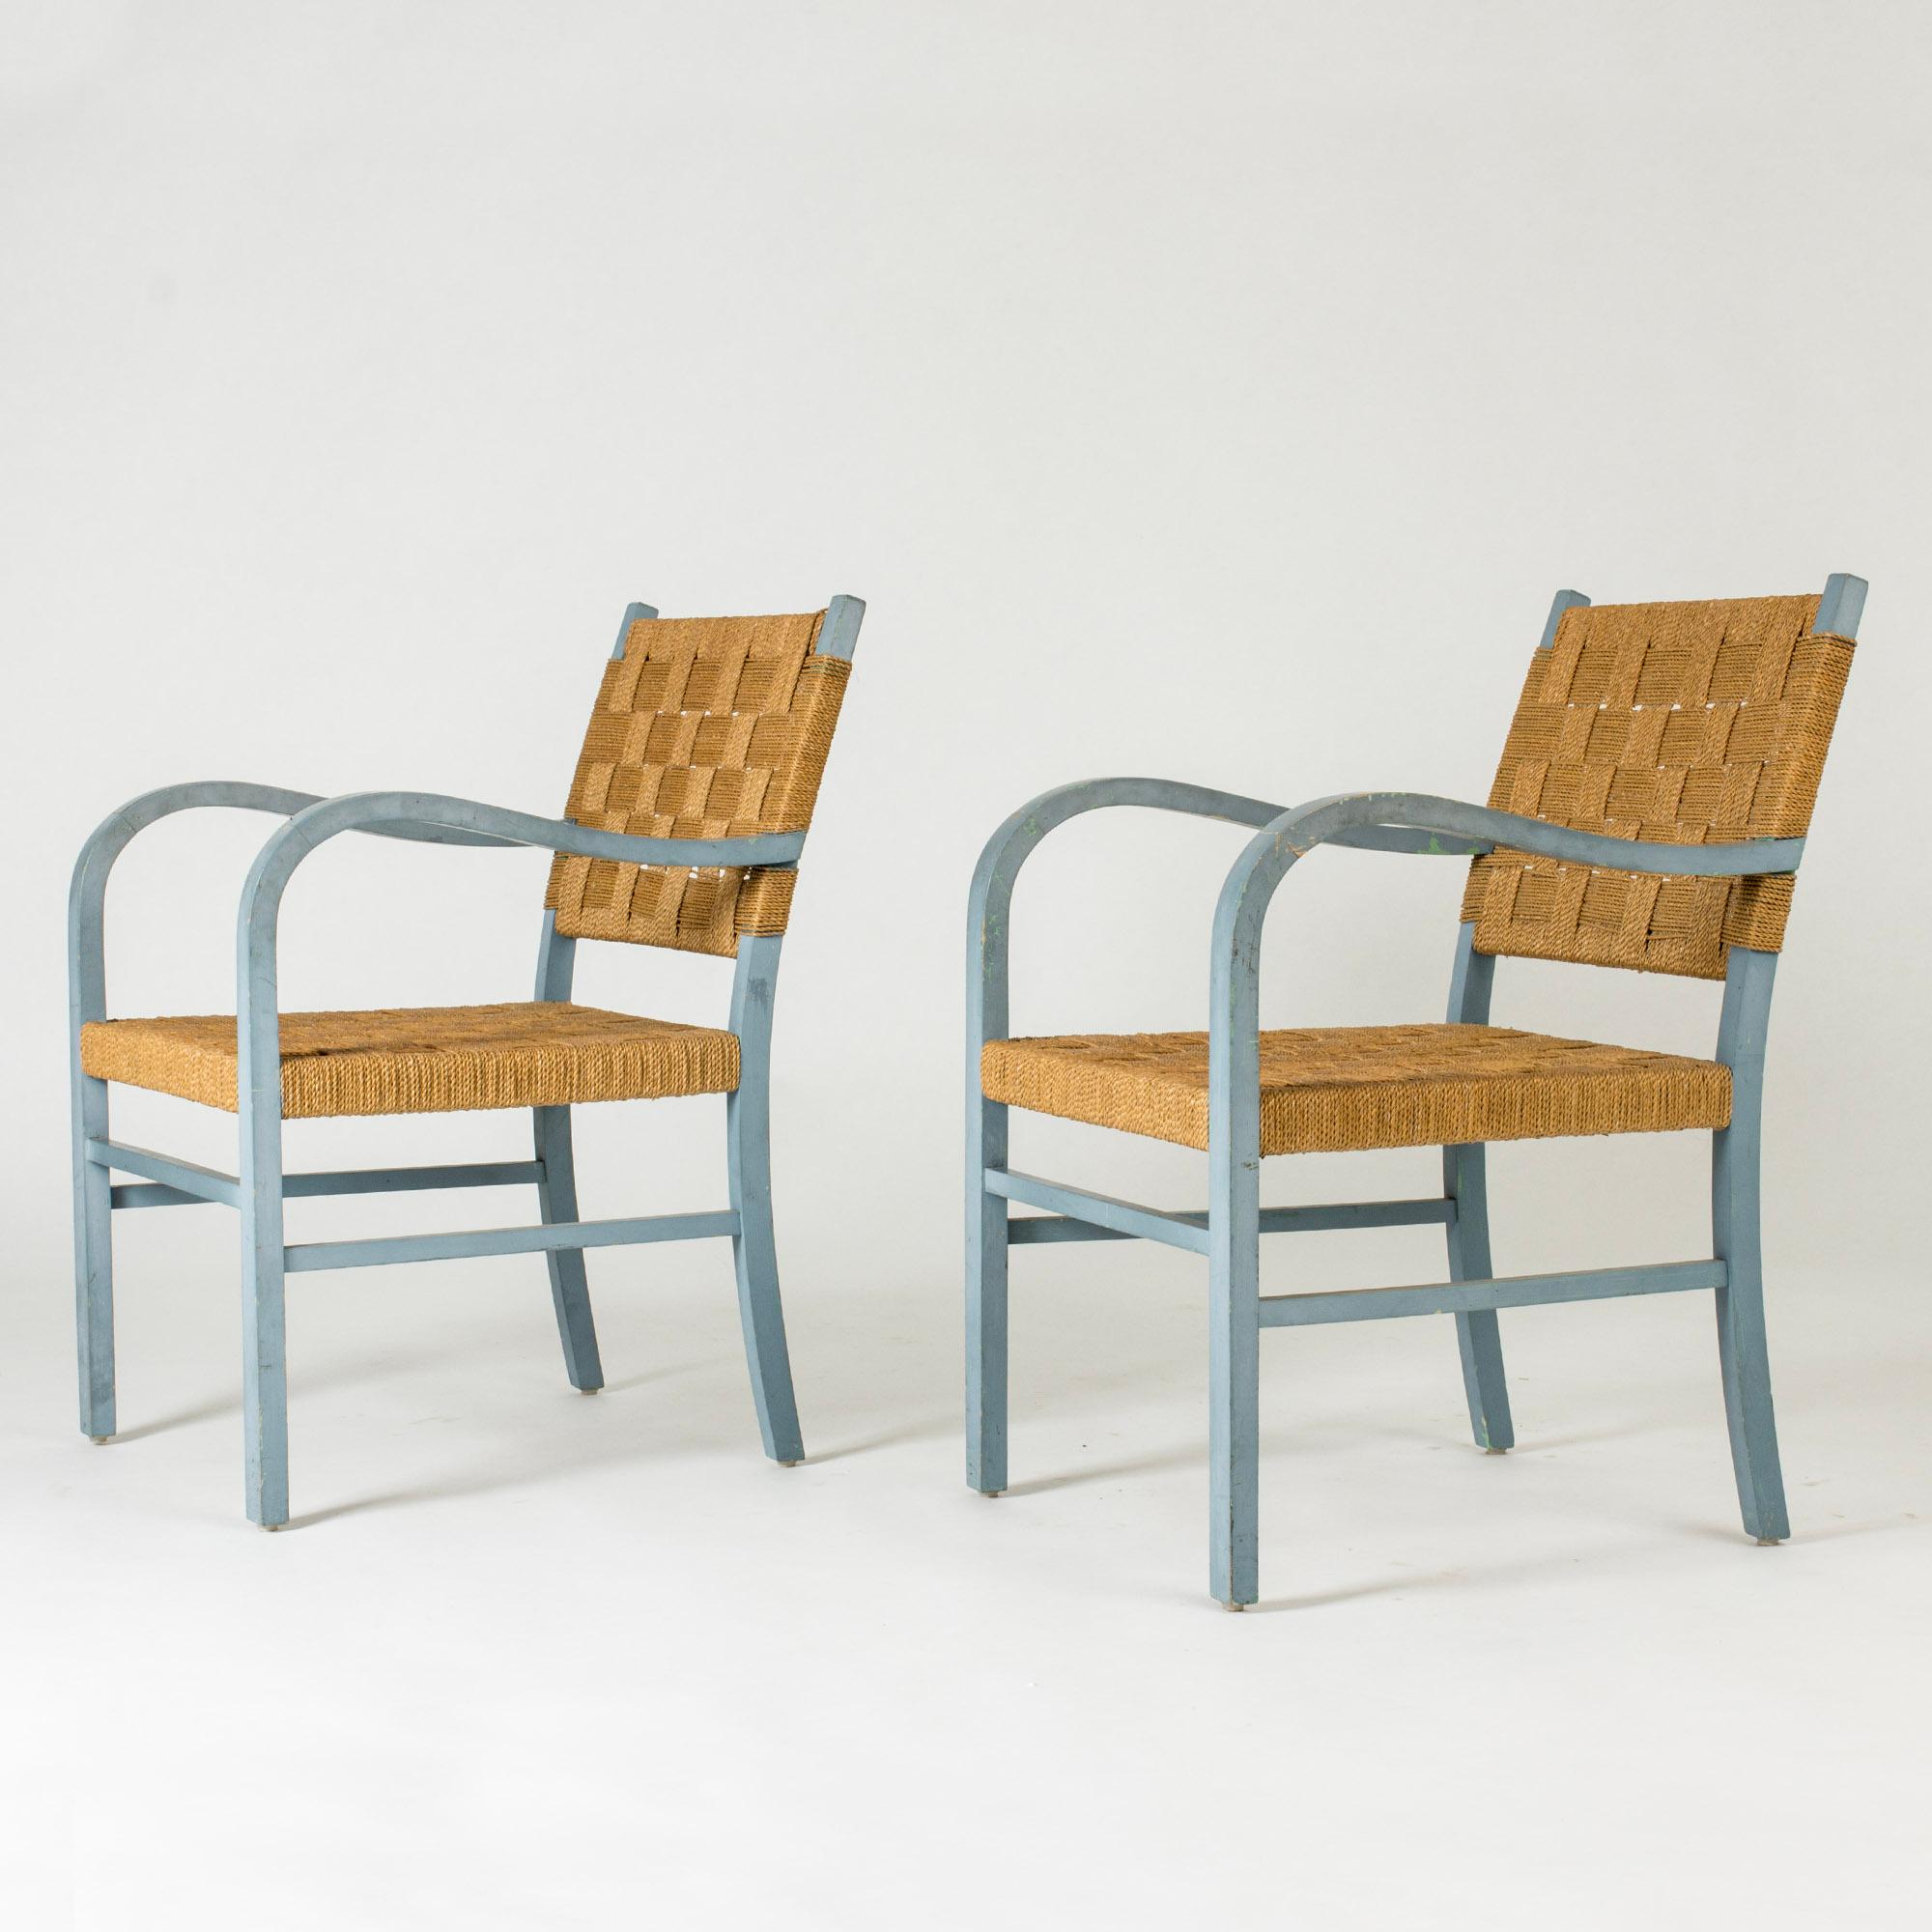 Pair of beautiful armchairs by Axel Larsson, with curved armrests creating lovely, open silhouettes. Painted sky blue, color losses from wear.